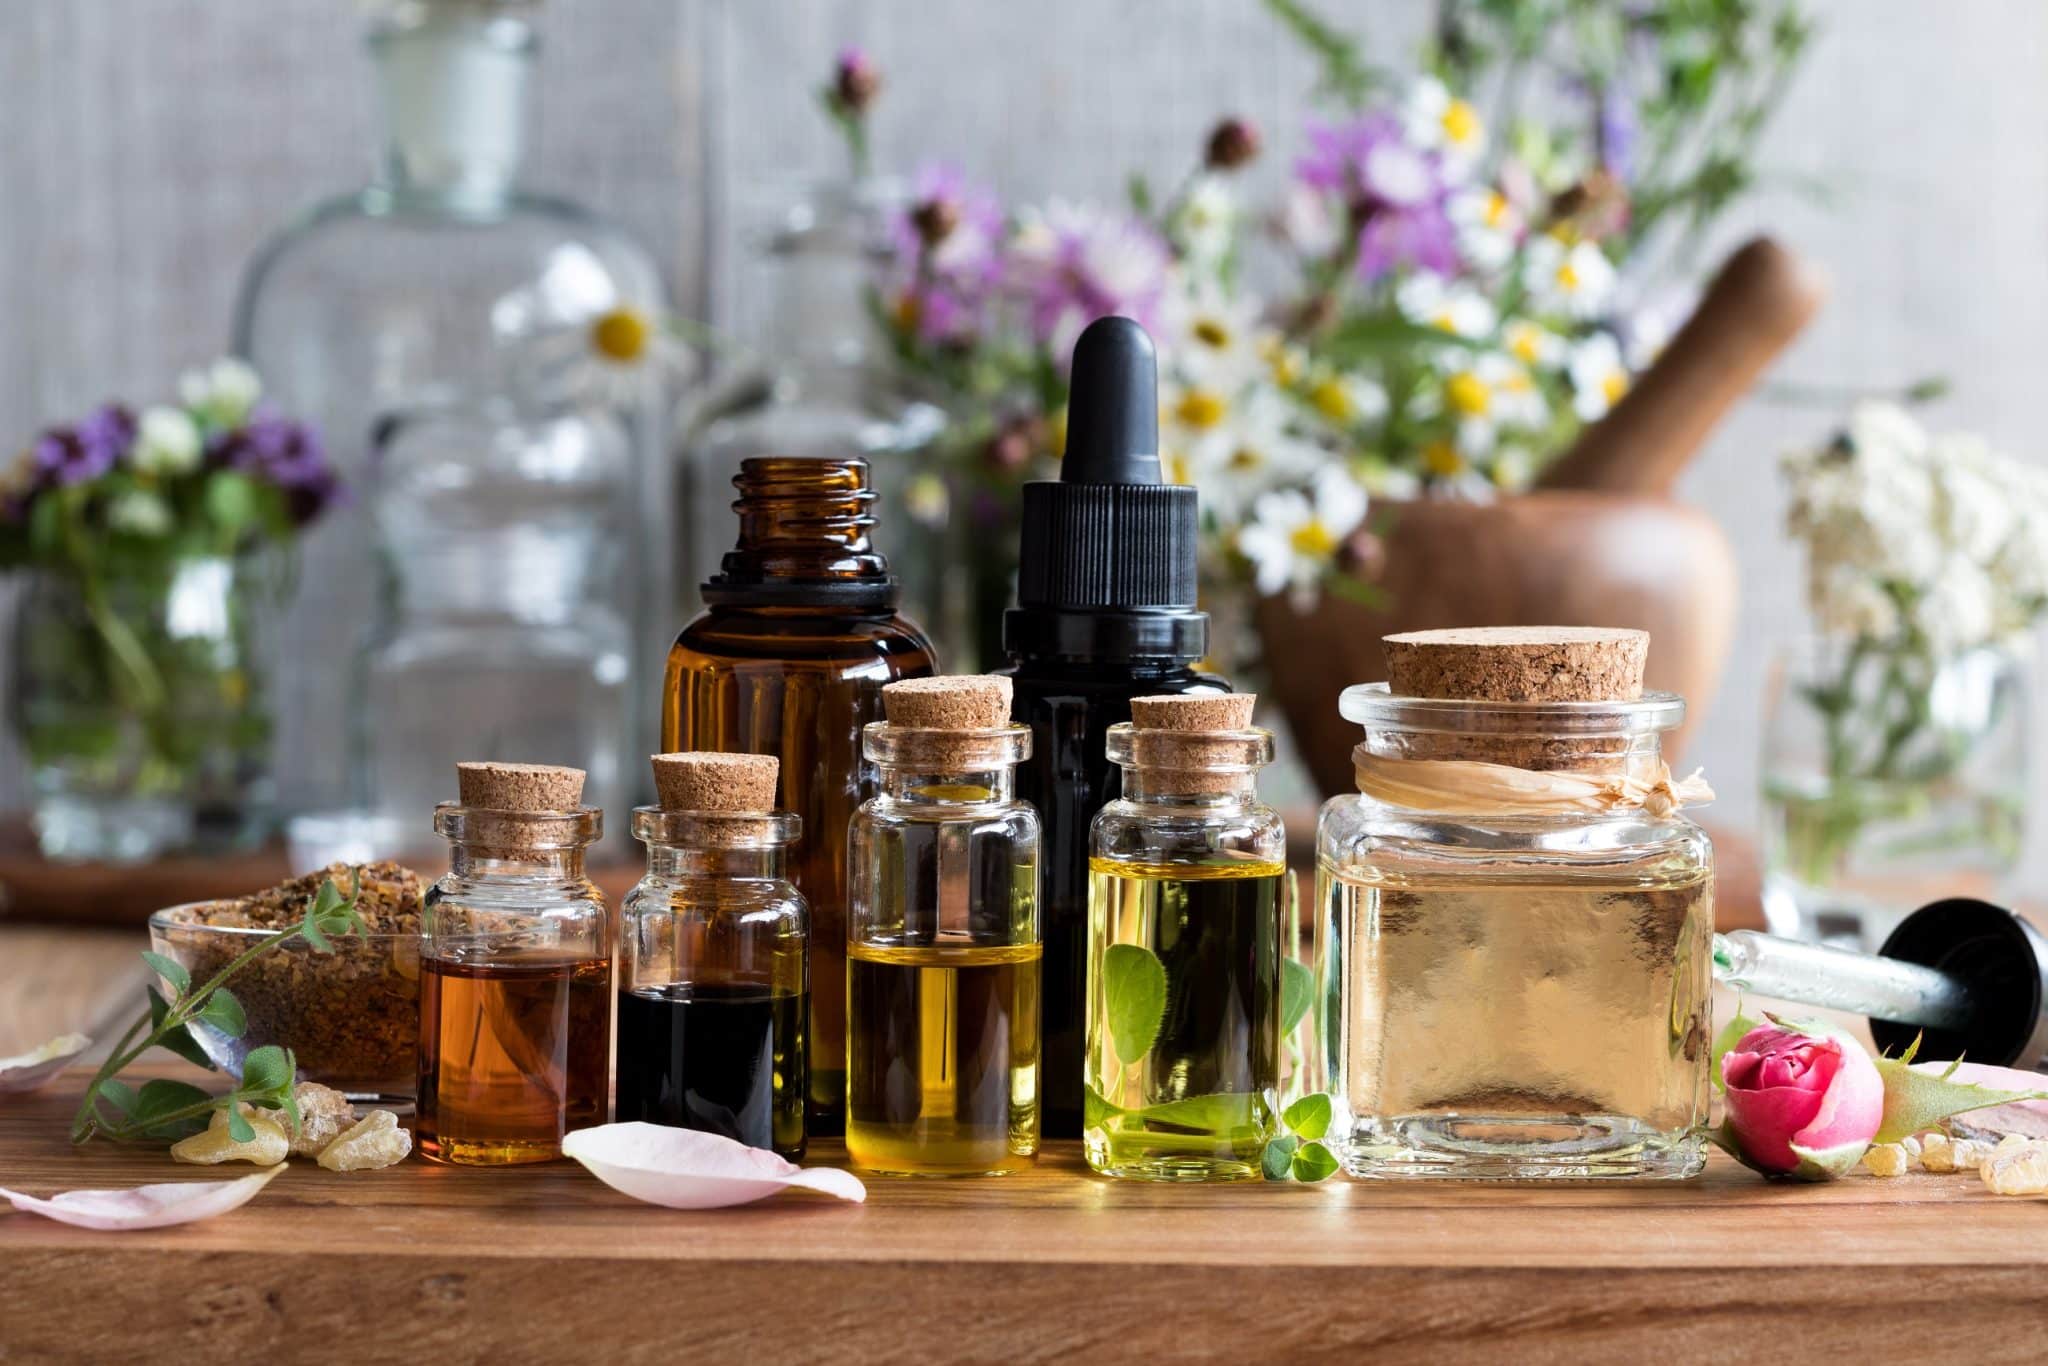 Rise of Organic & Natural Essential Oils - Challenges & Opportunities